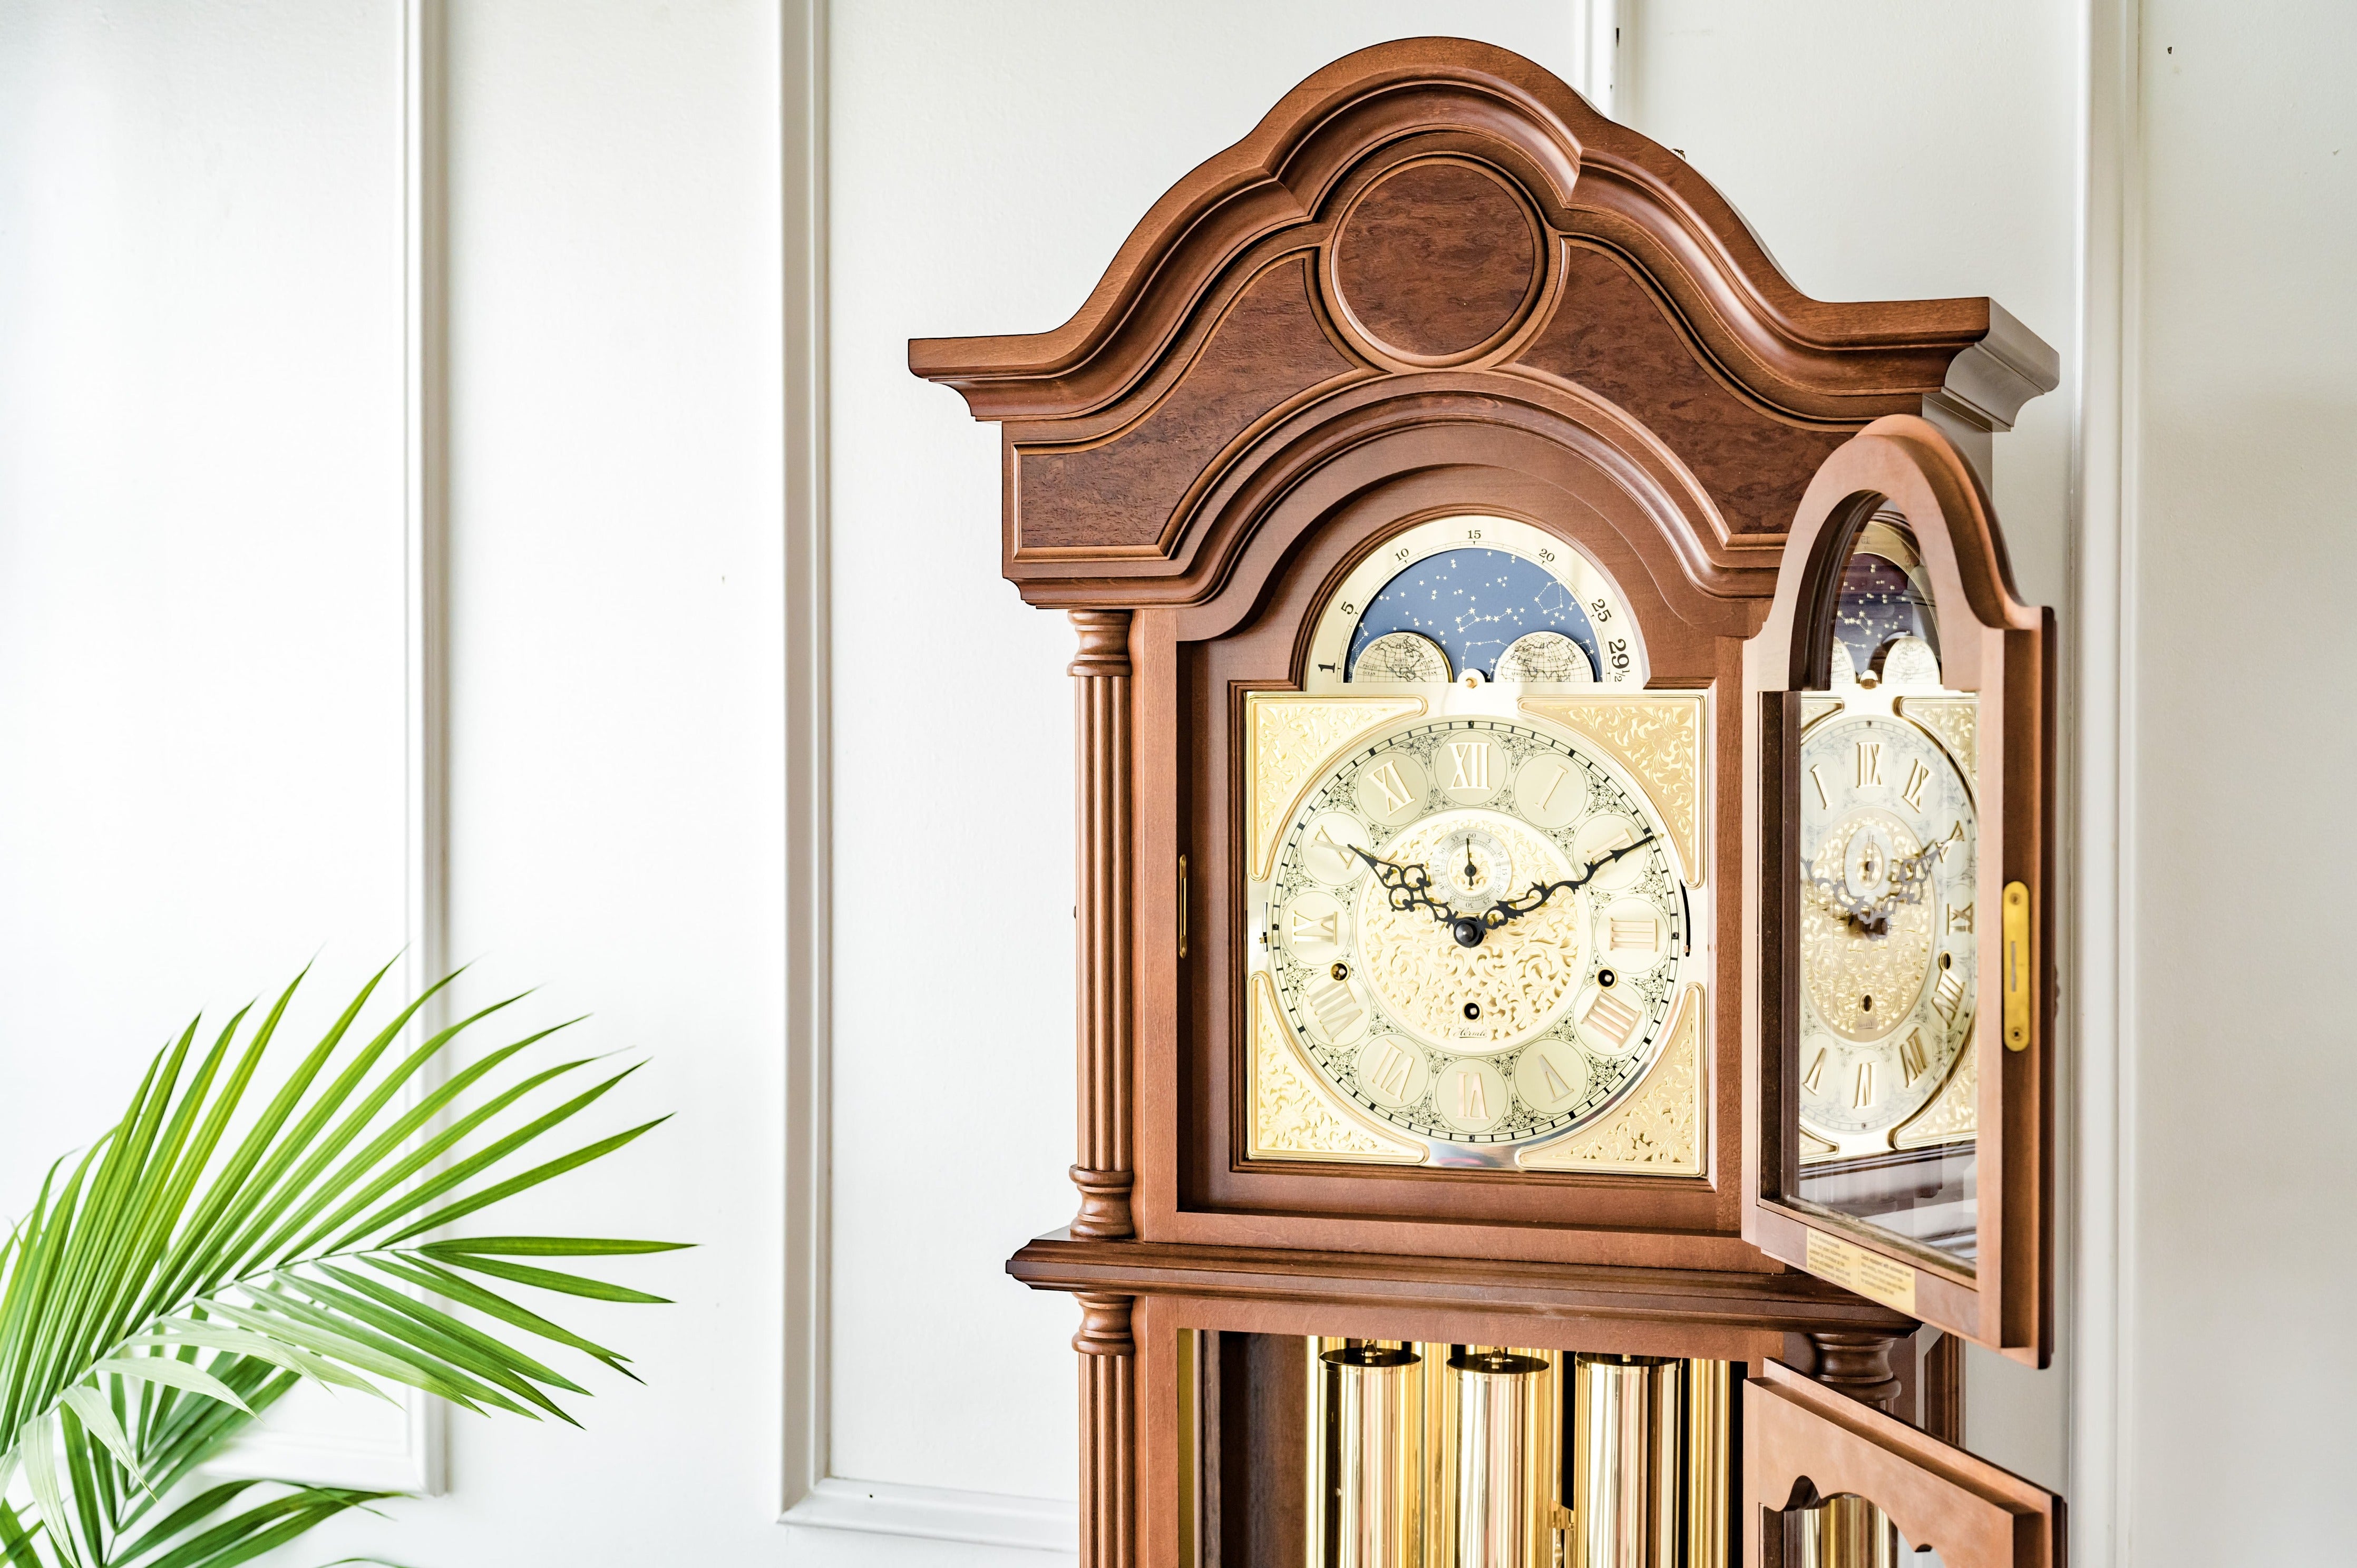 How To Move A Grandfather Clock: A Step-By-Step Guide To Safe Relocation